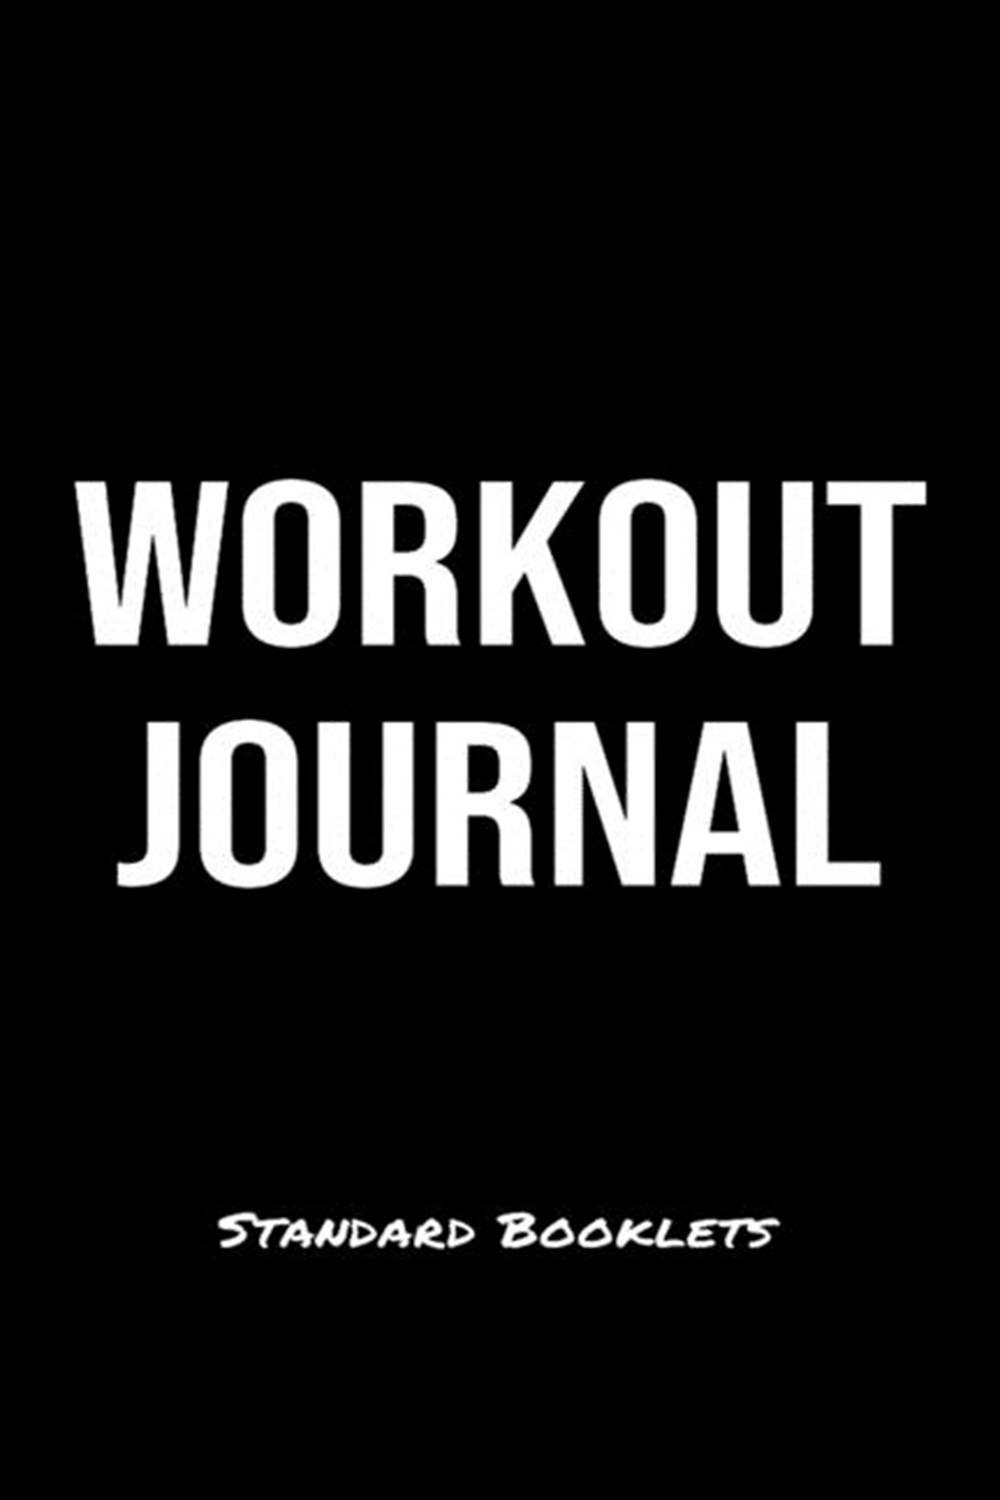 Workout Journal Standard Booklets A softcover fitness tracker to record five exercises for five days